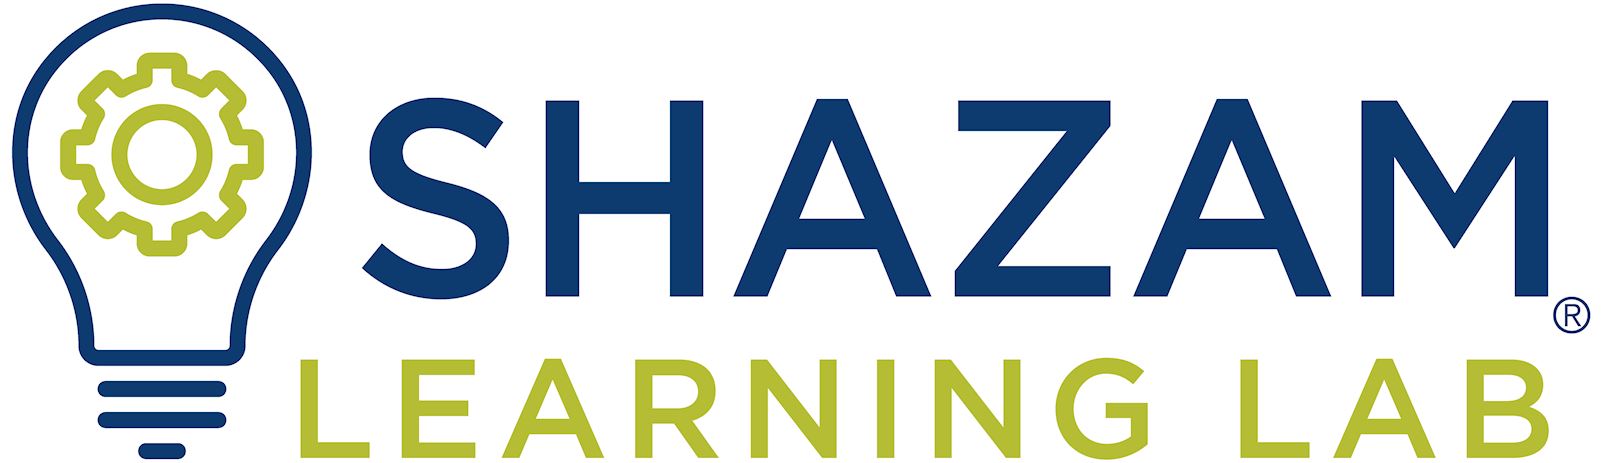 SHAZAM Learning Lab logo showing a light bulb and gear